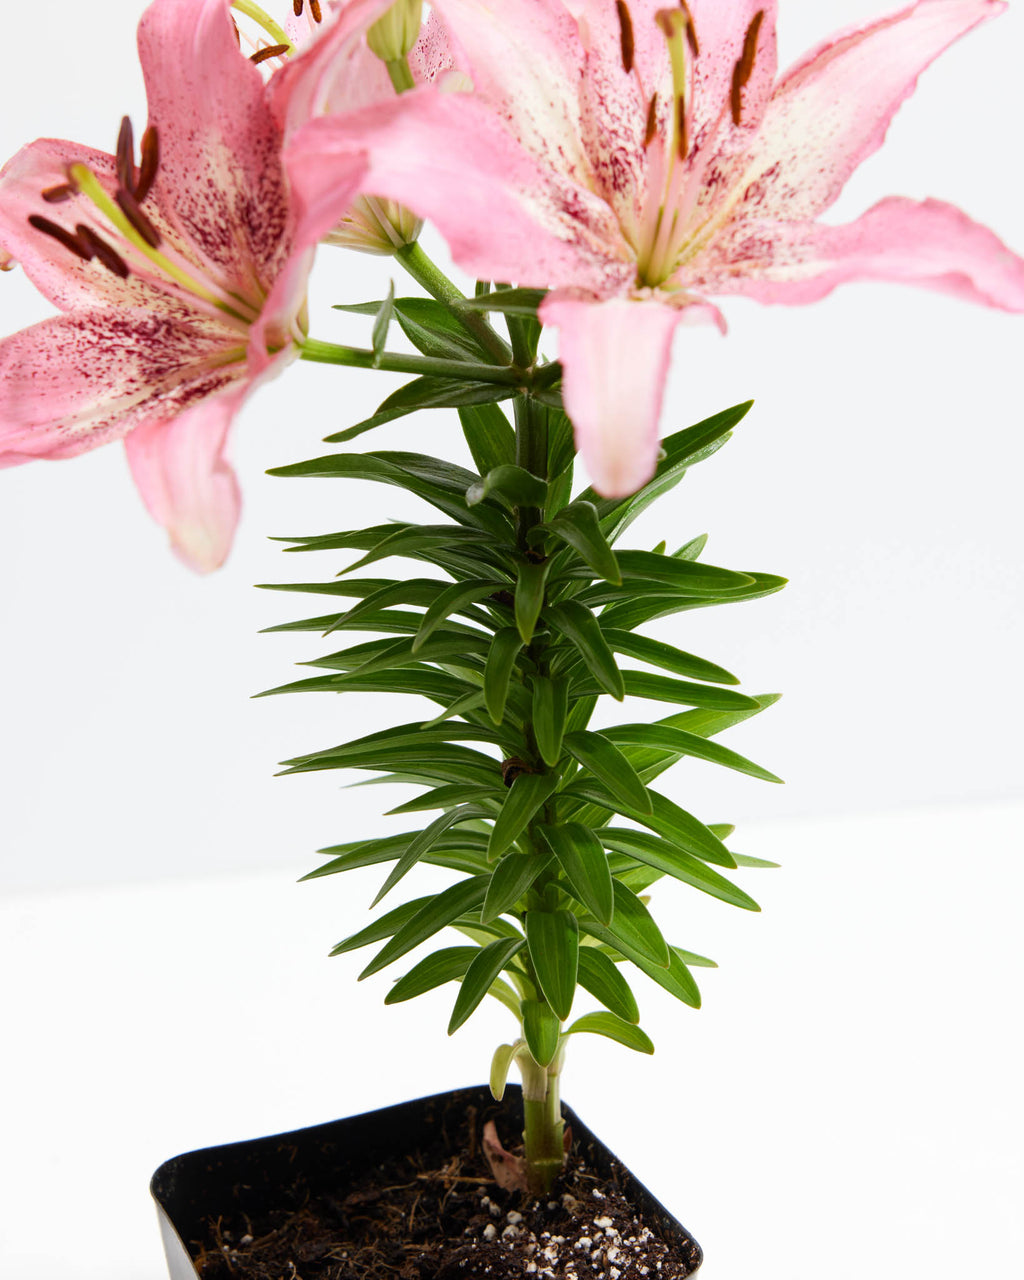 Asiatic Lily Pink Bicolor